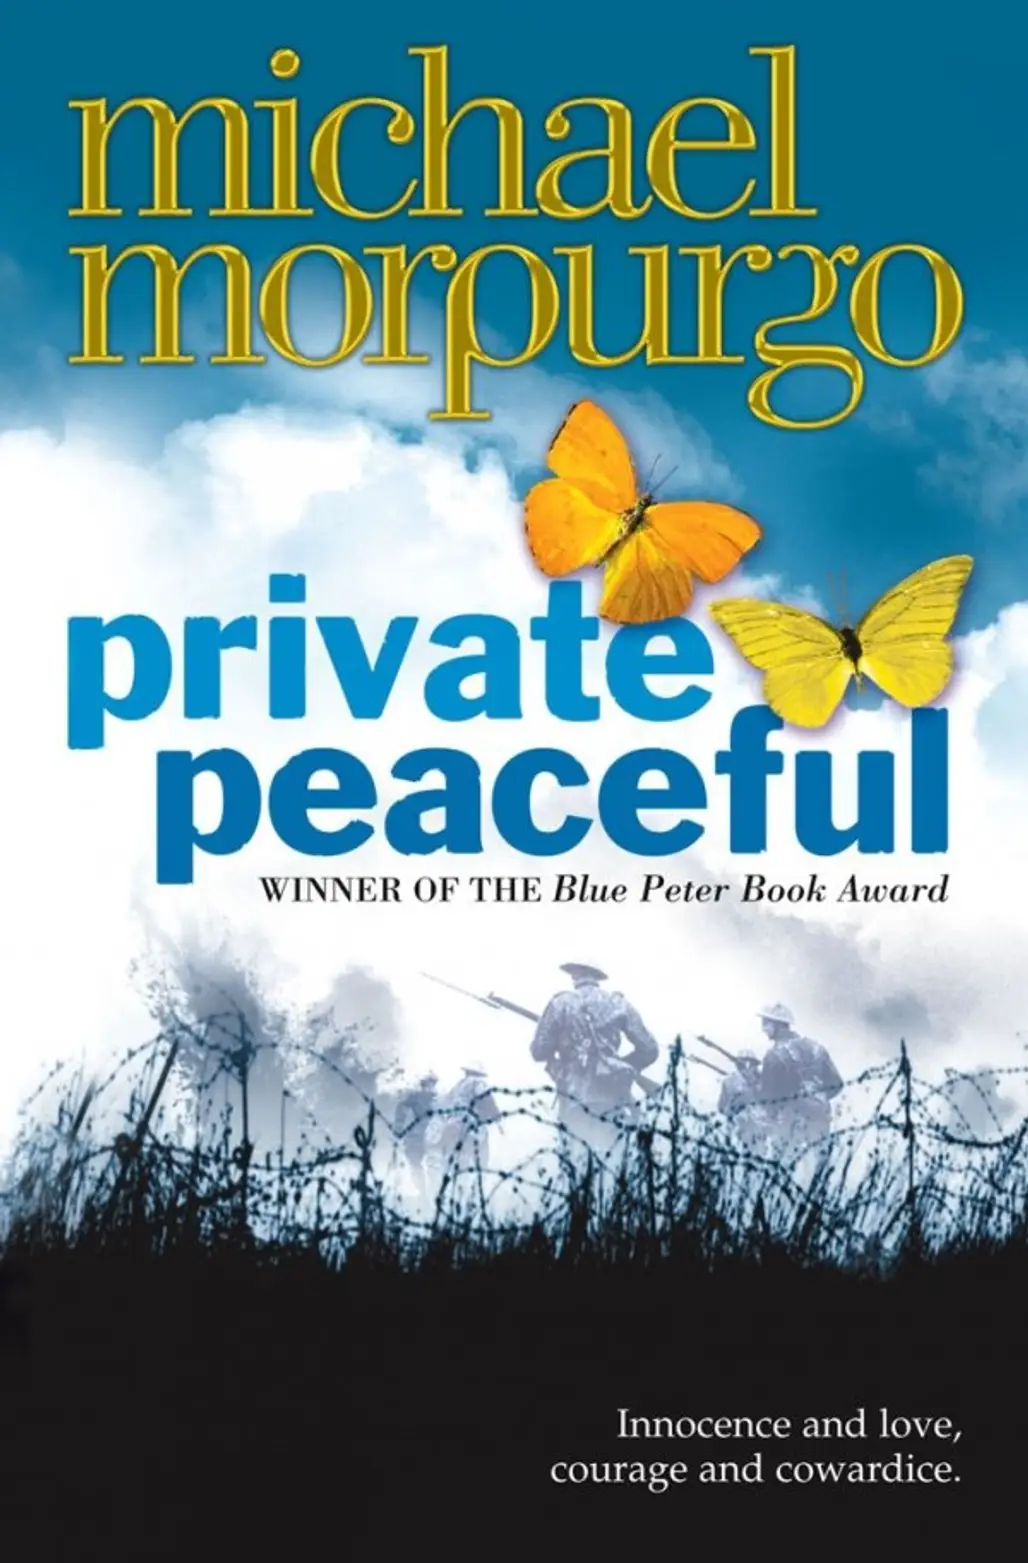 Private Peaceful by Michael Morpurgo (2003)